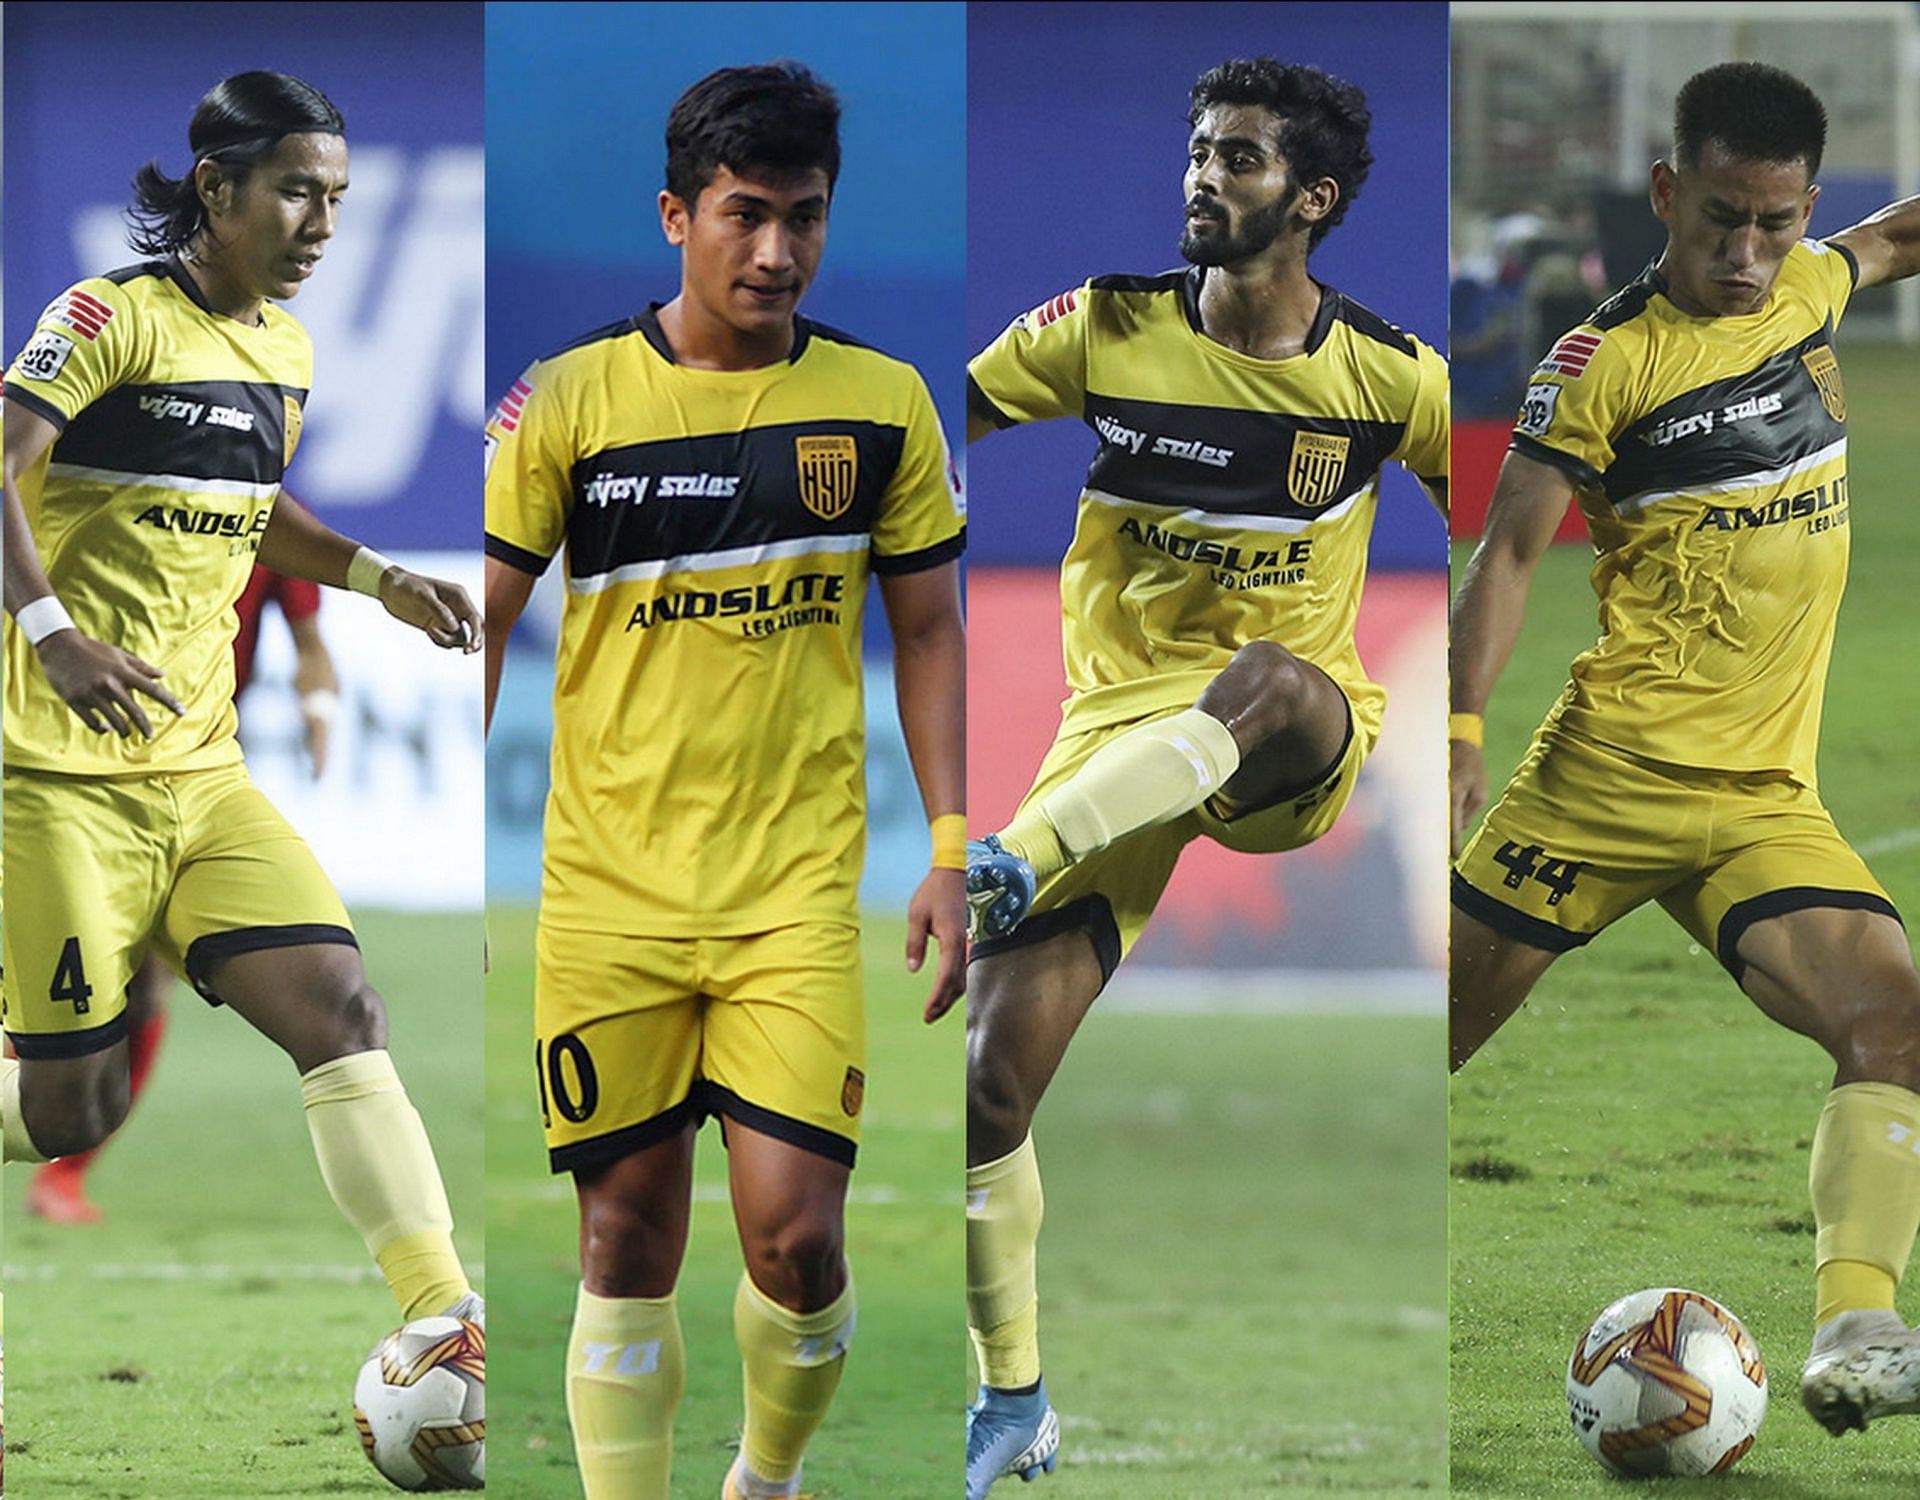 From left to right: The likes of Chinglensana, Yasir, Akash and Asish are touted as the future stars of Indian football. Image - HFC